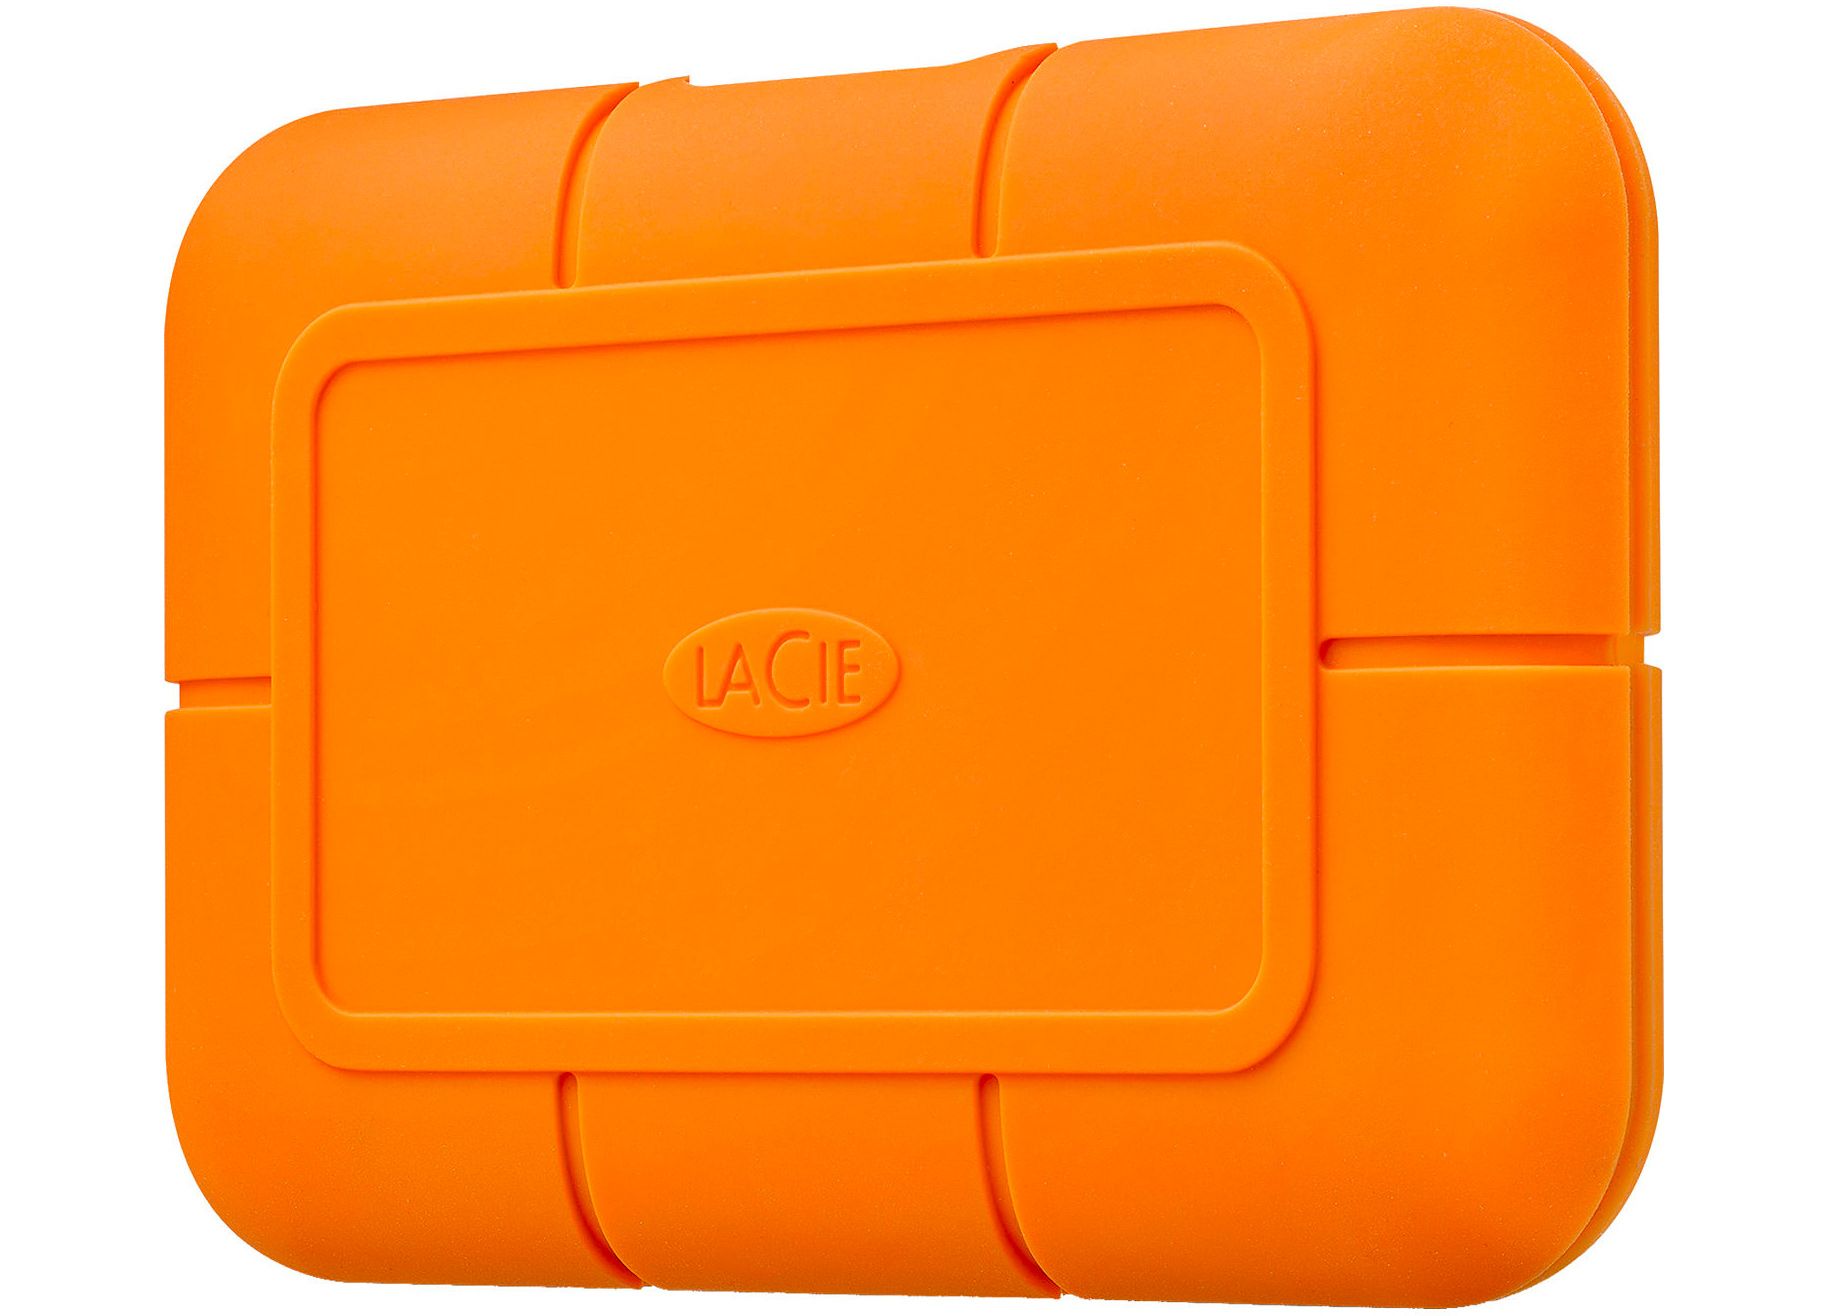 LaCie - Disque dur externe Rugged SSD 2TB USB 3.1 Type-C